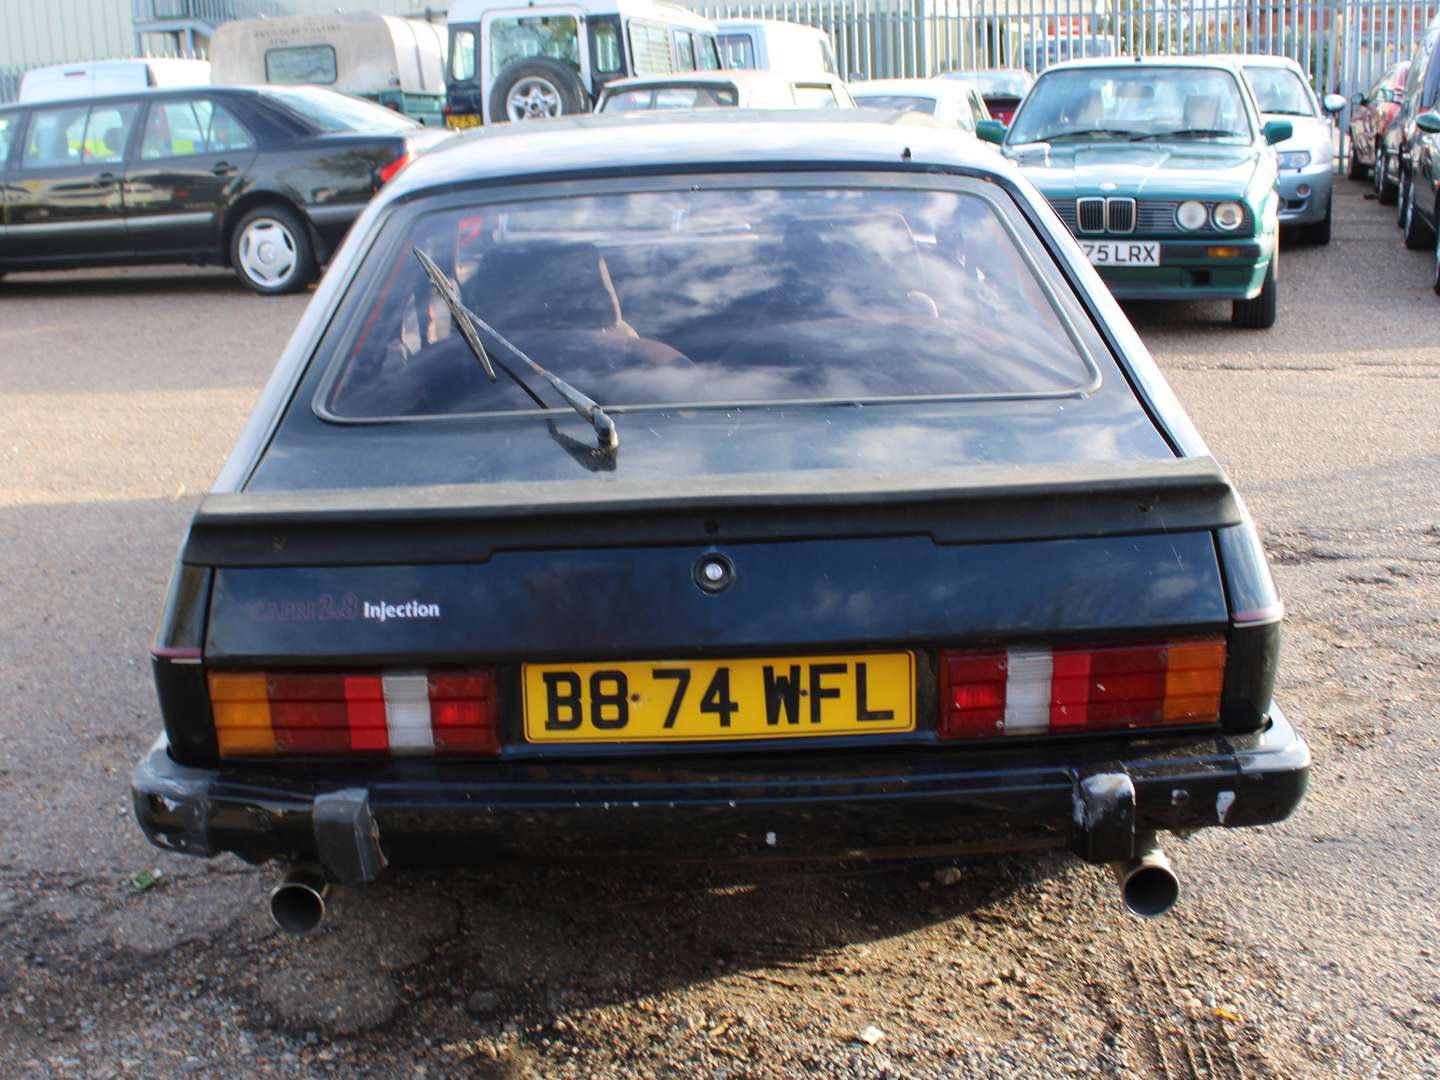 <p>1984 FORD CAPRI 2.8 INJECTION</p>